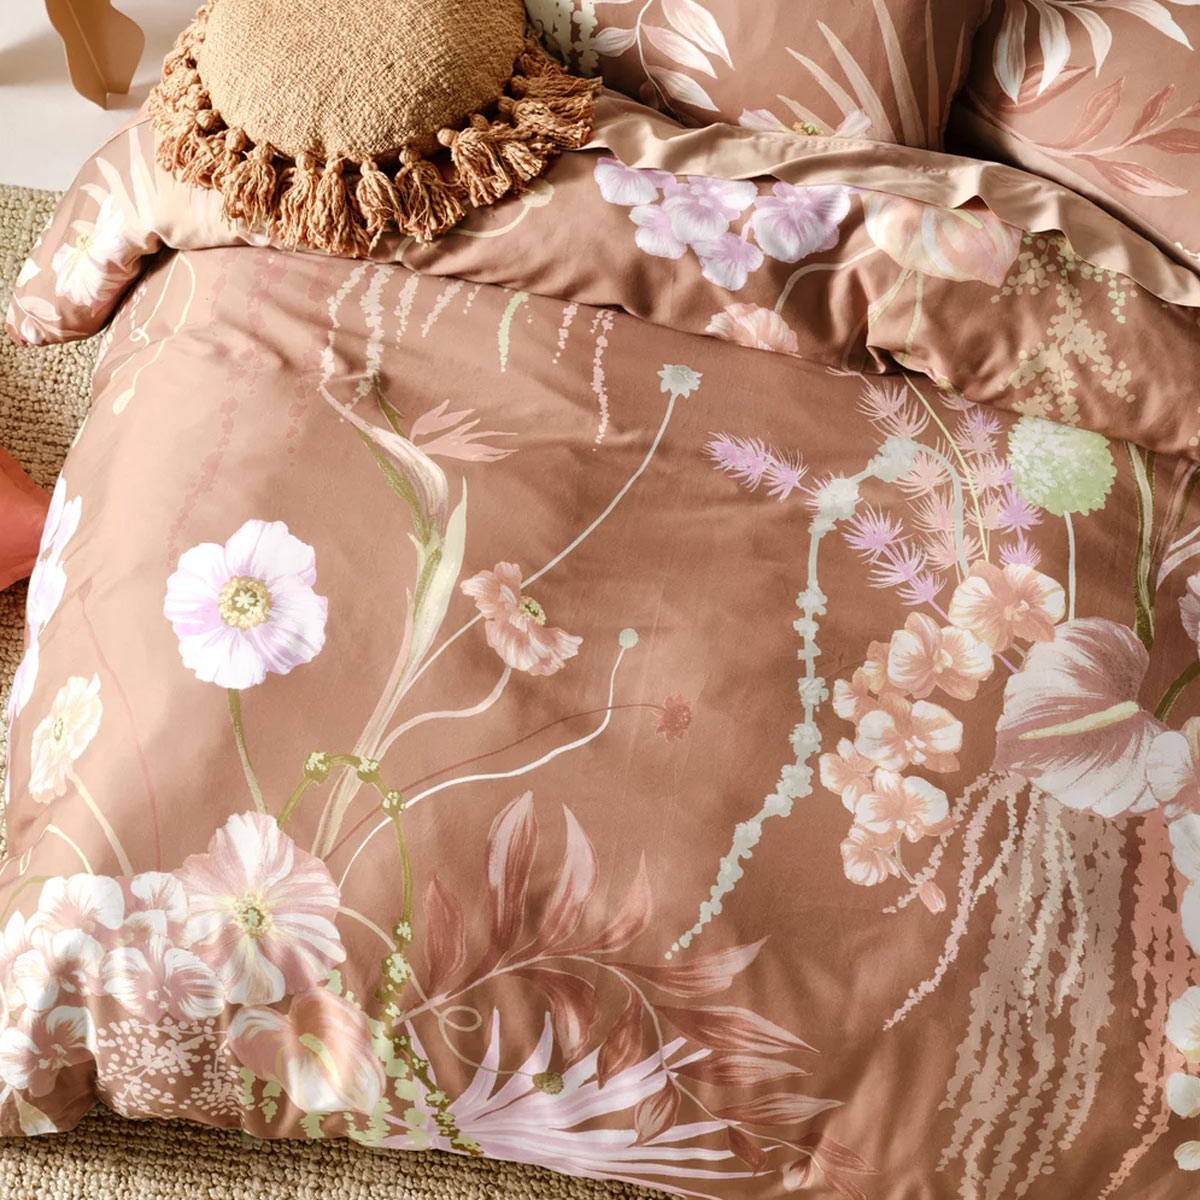 Bobbi Clay Quilt Cover Set by Linen House